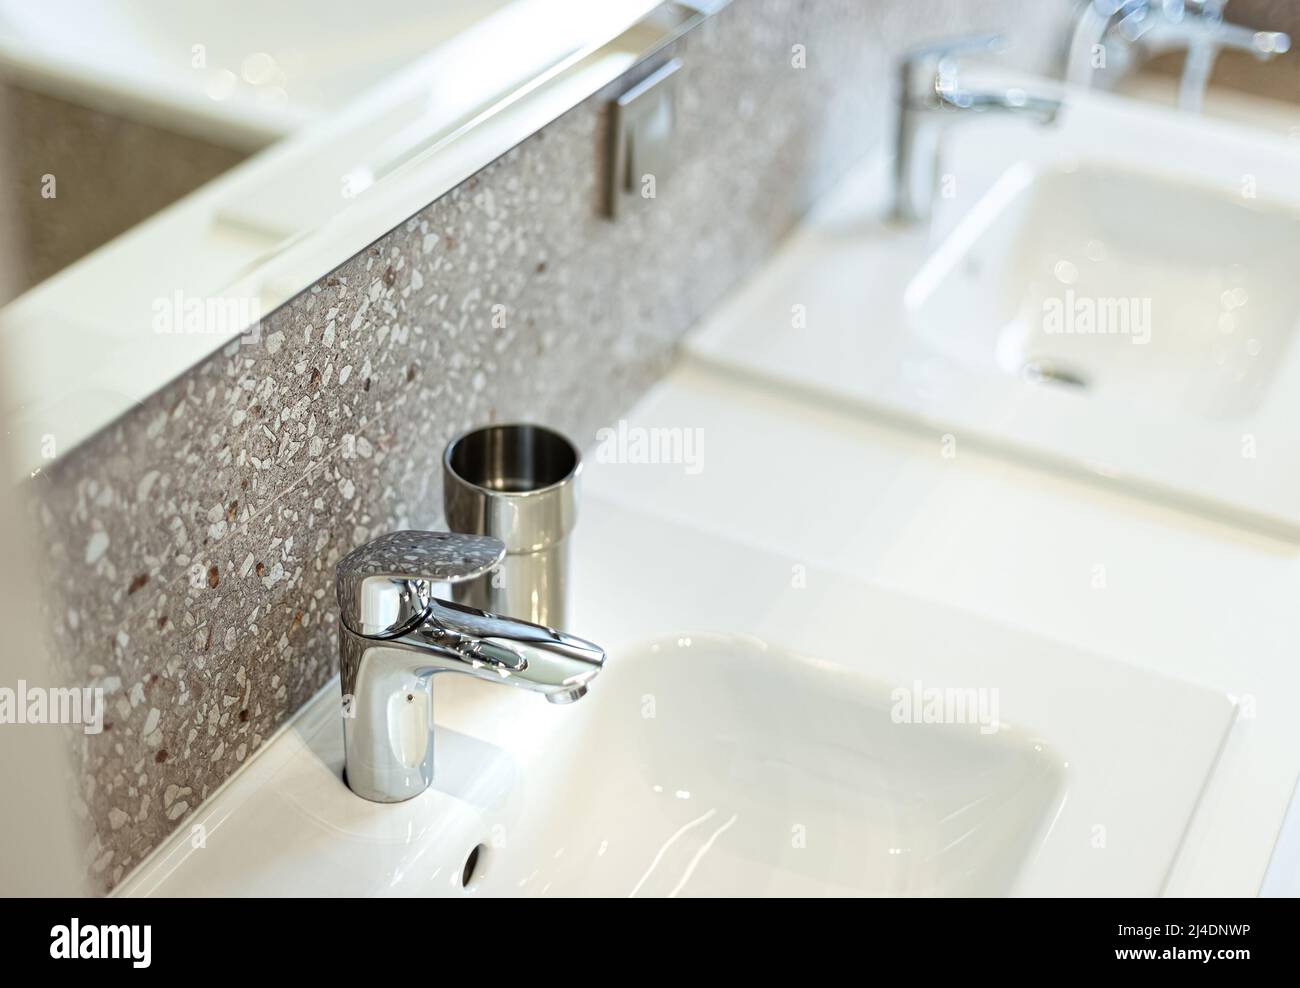 Modern washbasin with chrome faucet (water mixer) close-up. Stock Photo